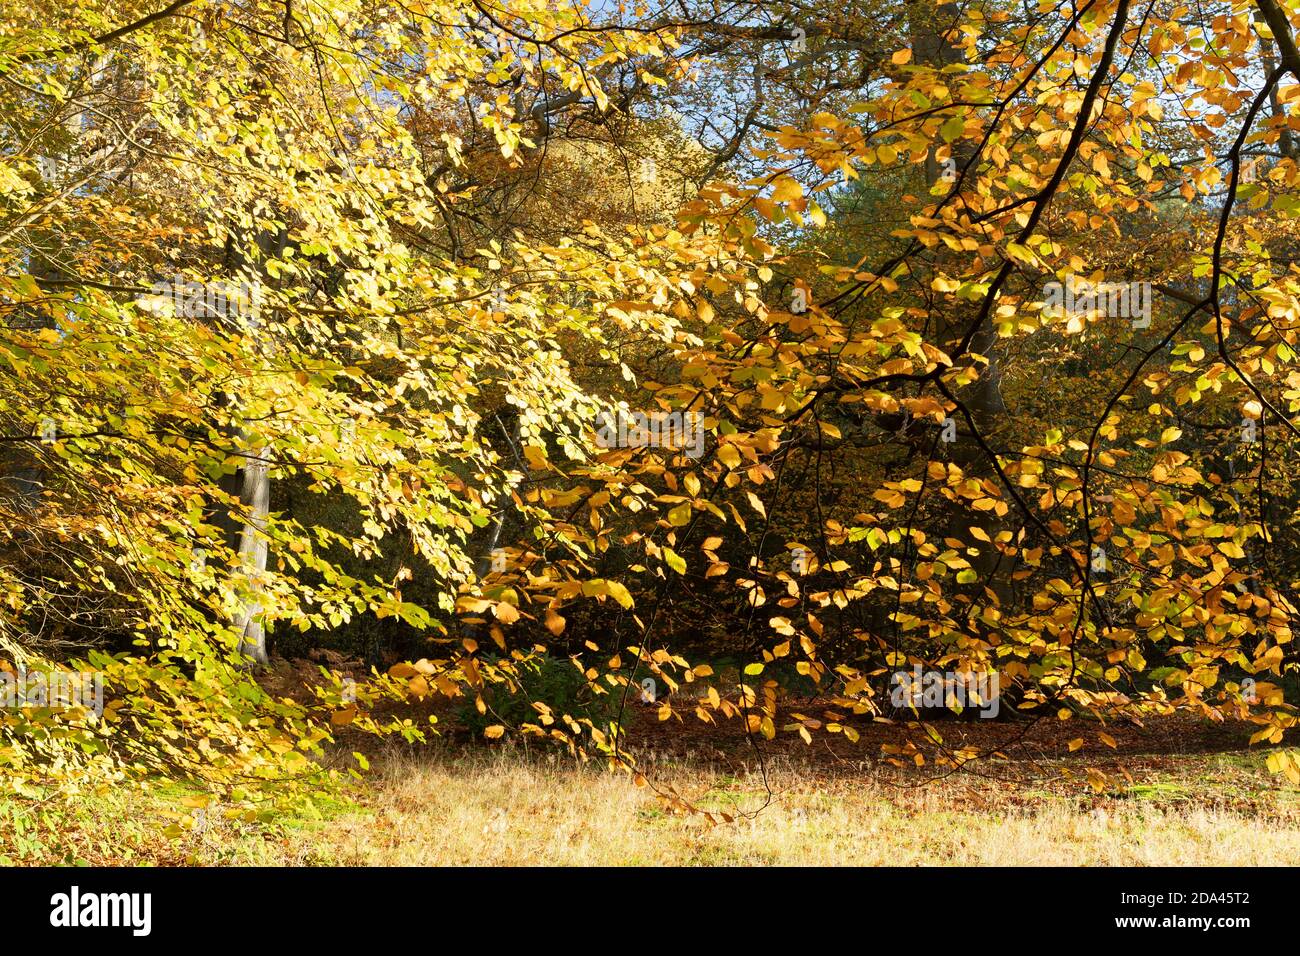 Autumn colours in ancient mixed woodland, golden and bronze coloured leaves on mature trees, UK Stock Photo